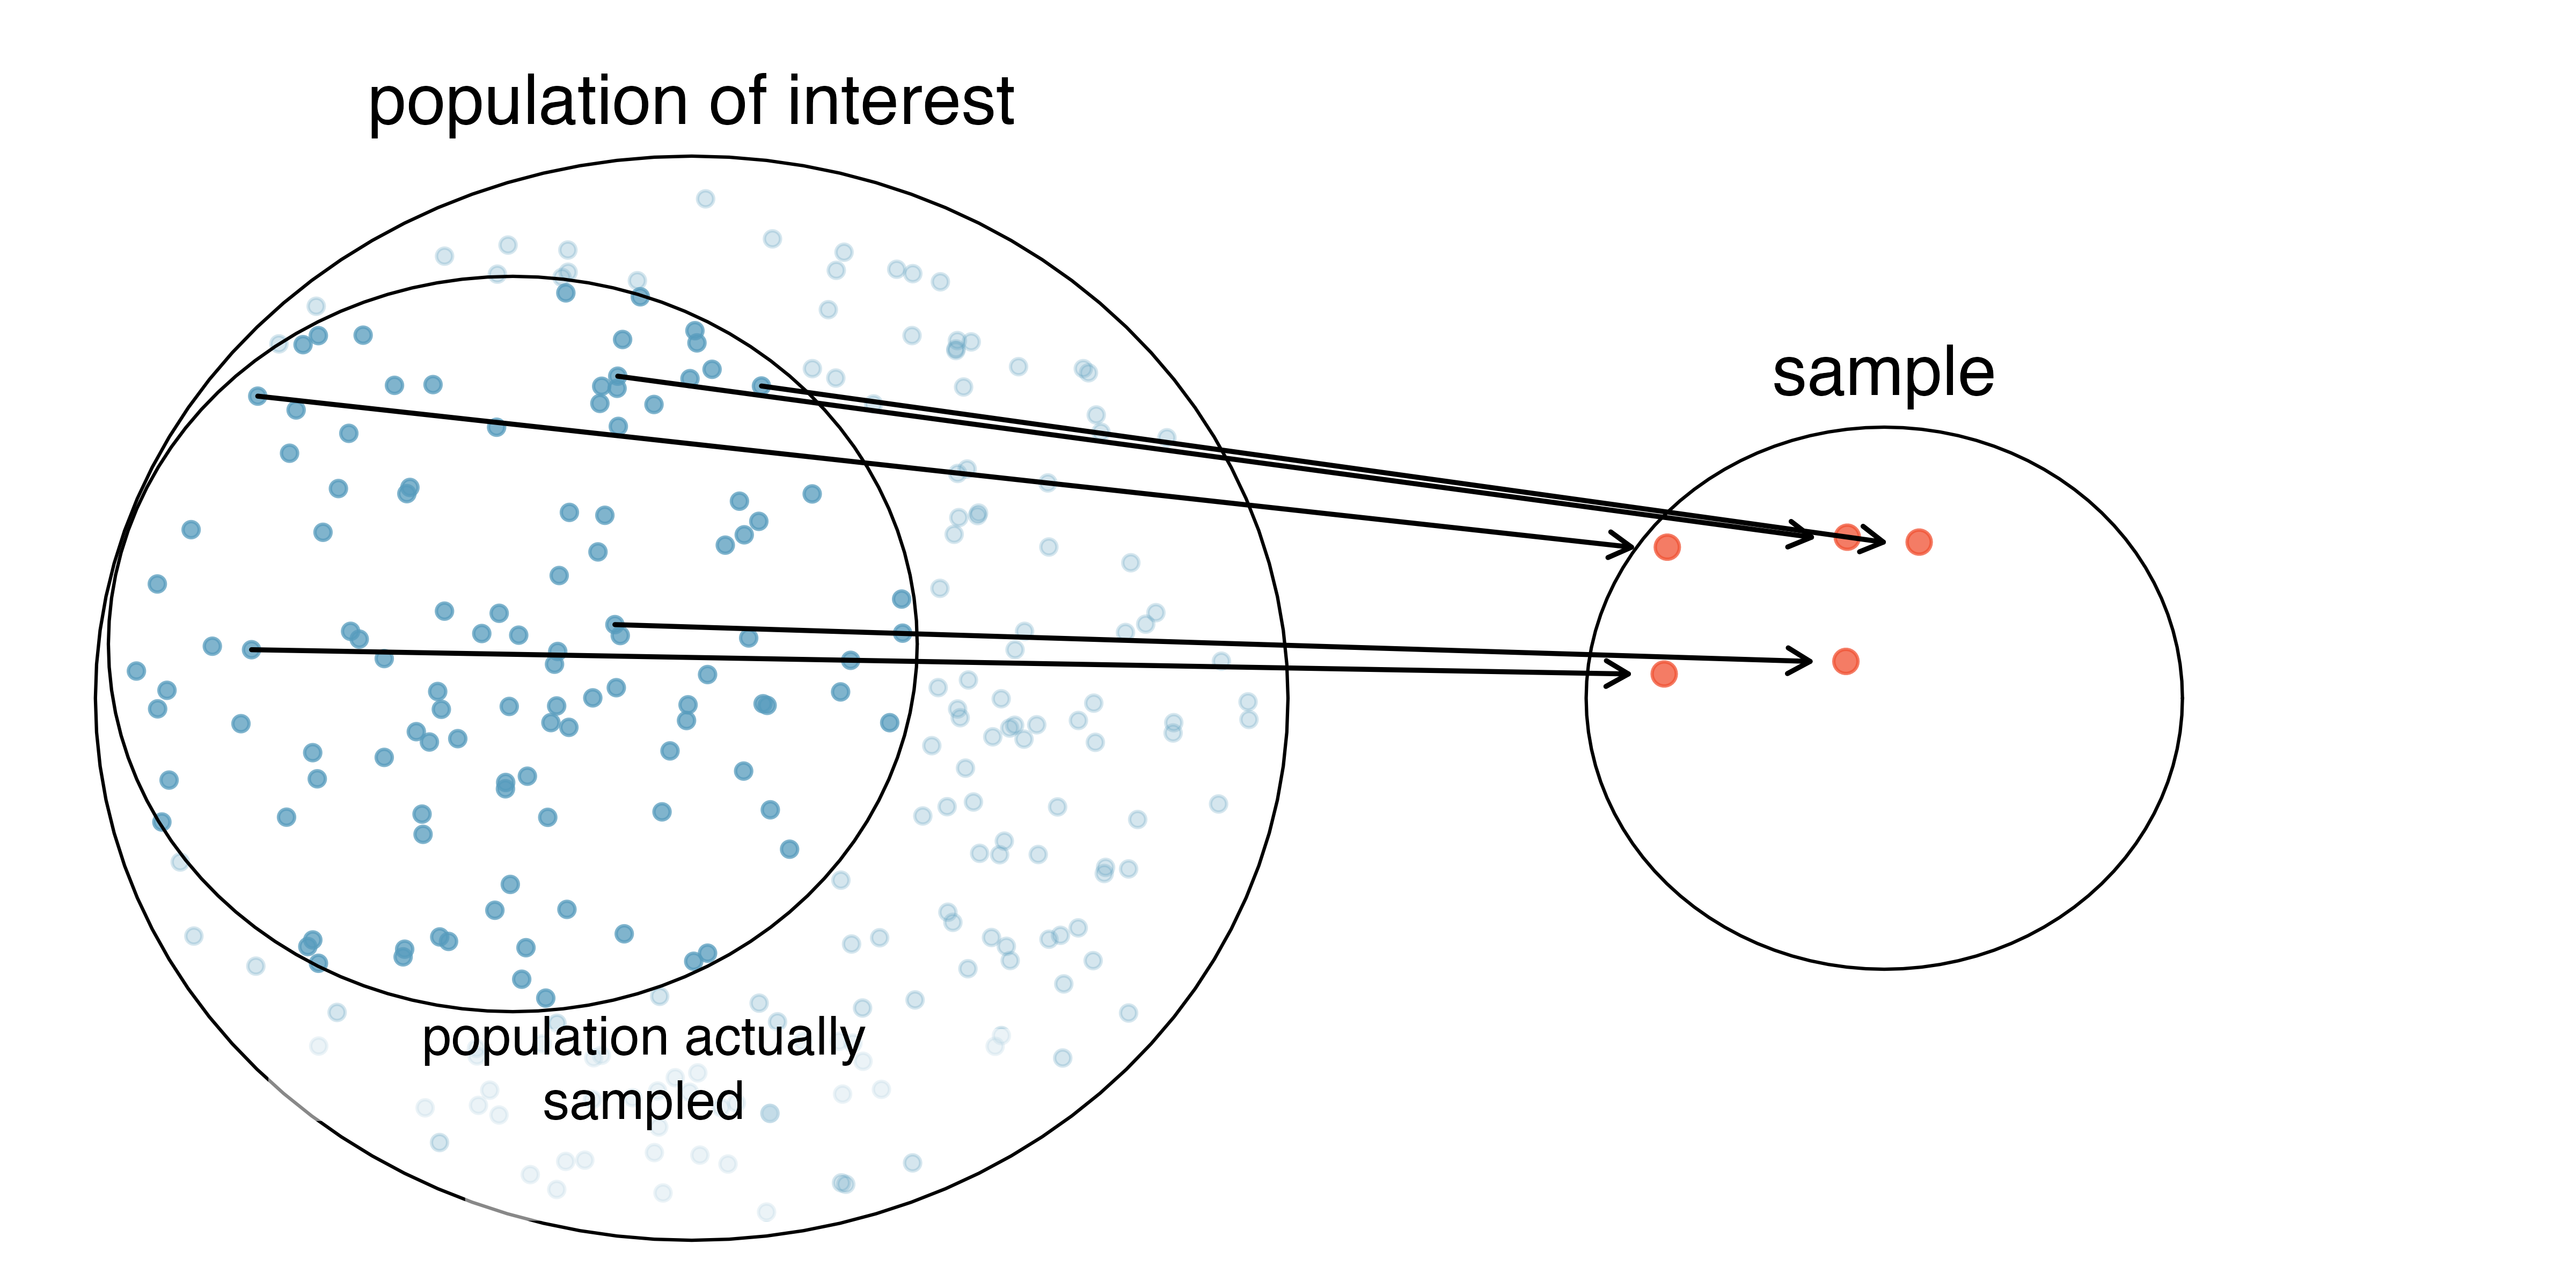 A large circle contains many dots which indicate the population of interest, but some of the dots have been greyed out where others are dark dots from which the sample is taken (where the grey dots are potentially due to non-response bias).  A smaller circle contains a few of the dots which have been selected from the group of dark dots in the large circle who were individuals willing to respond to the survey.